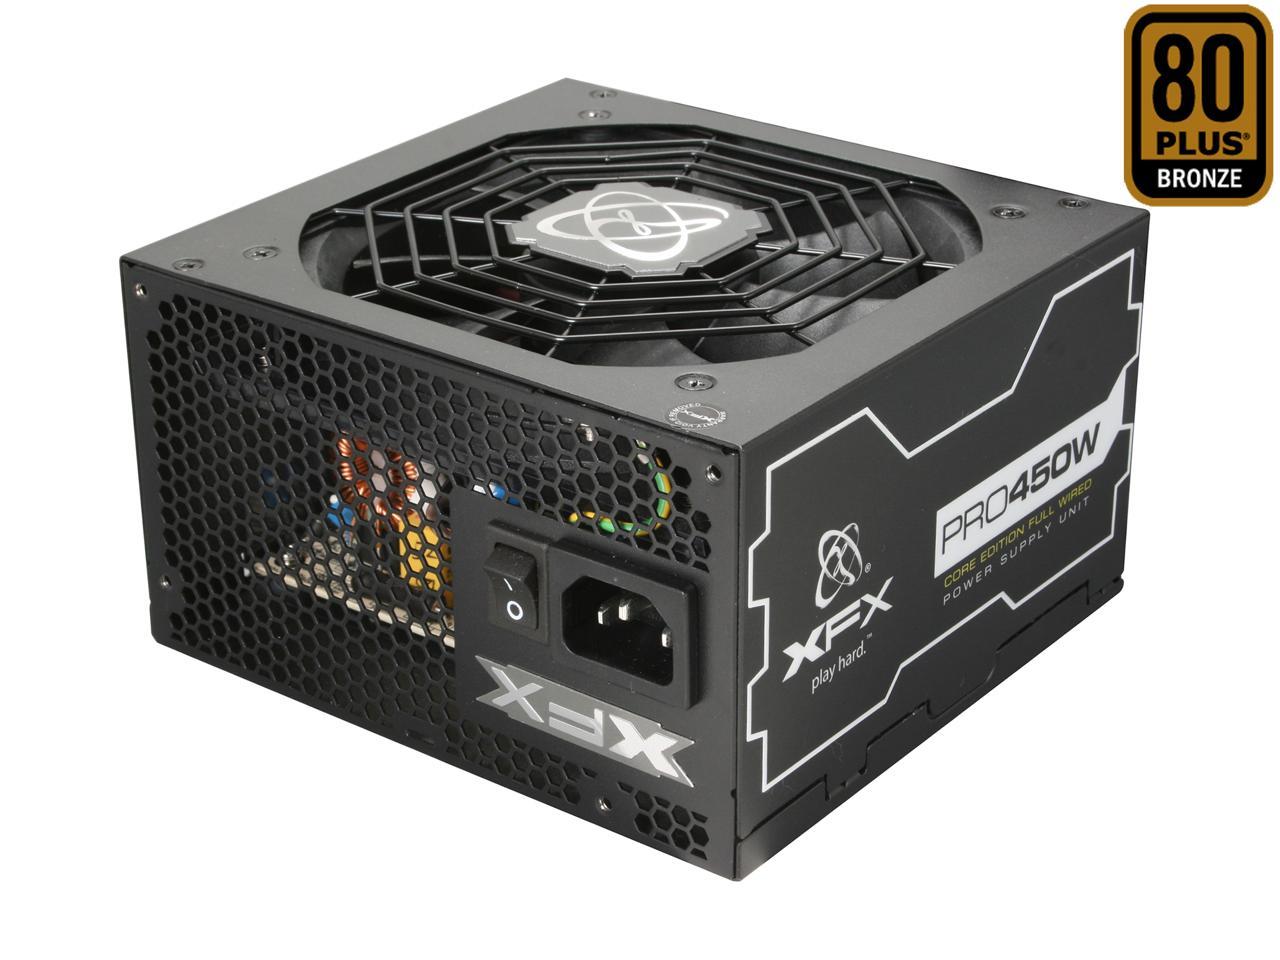 Discomfort attack Separately XFX Core Edition PRO450W (P1-450S-XXB9) 450 W Power Supply - Newegg.com